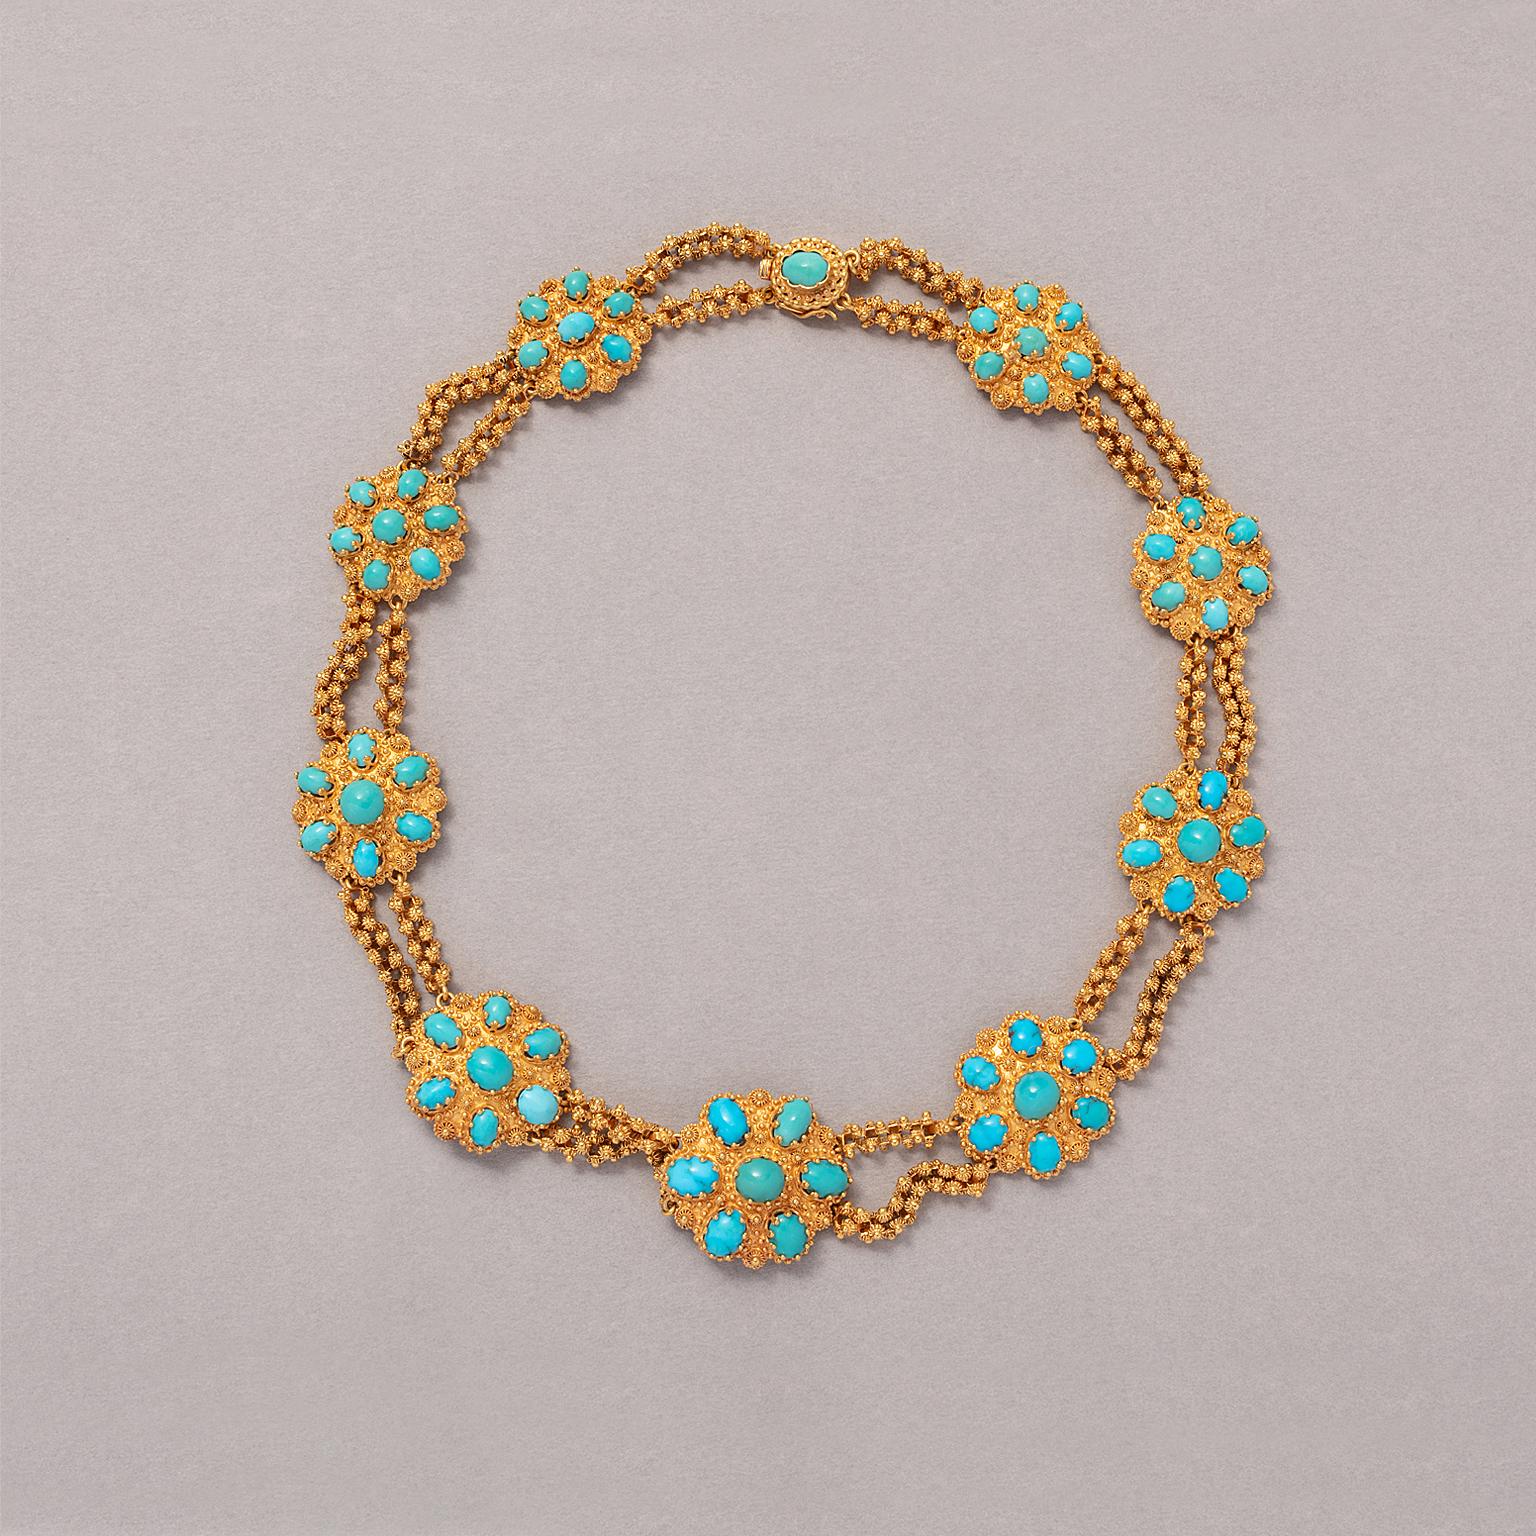 An 18 carat yellow gold and turquoise necklace, consisting of nine rosette shaped ornaments, with cannetille decorations descending in size, each set with six oval cabochon cut turquoises and one in the middle. In between two strands of filigree